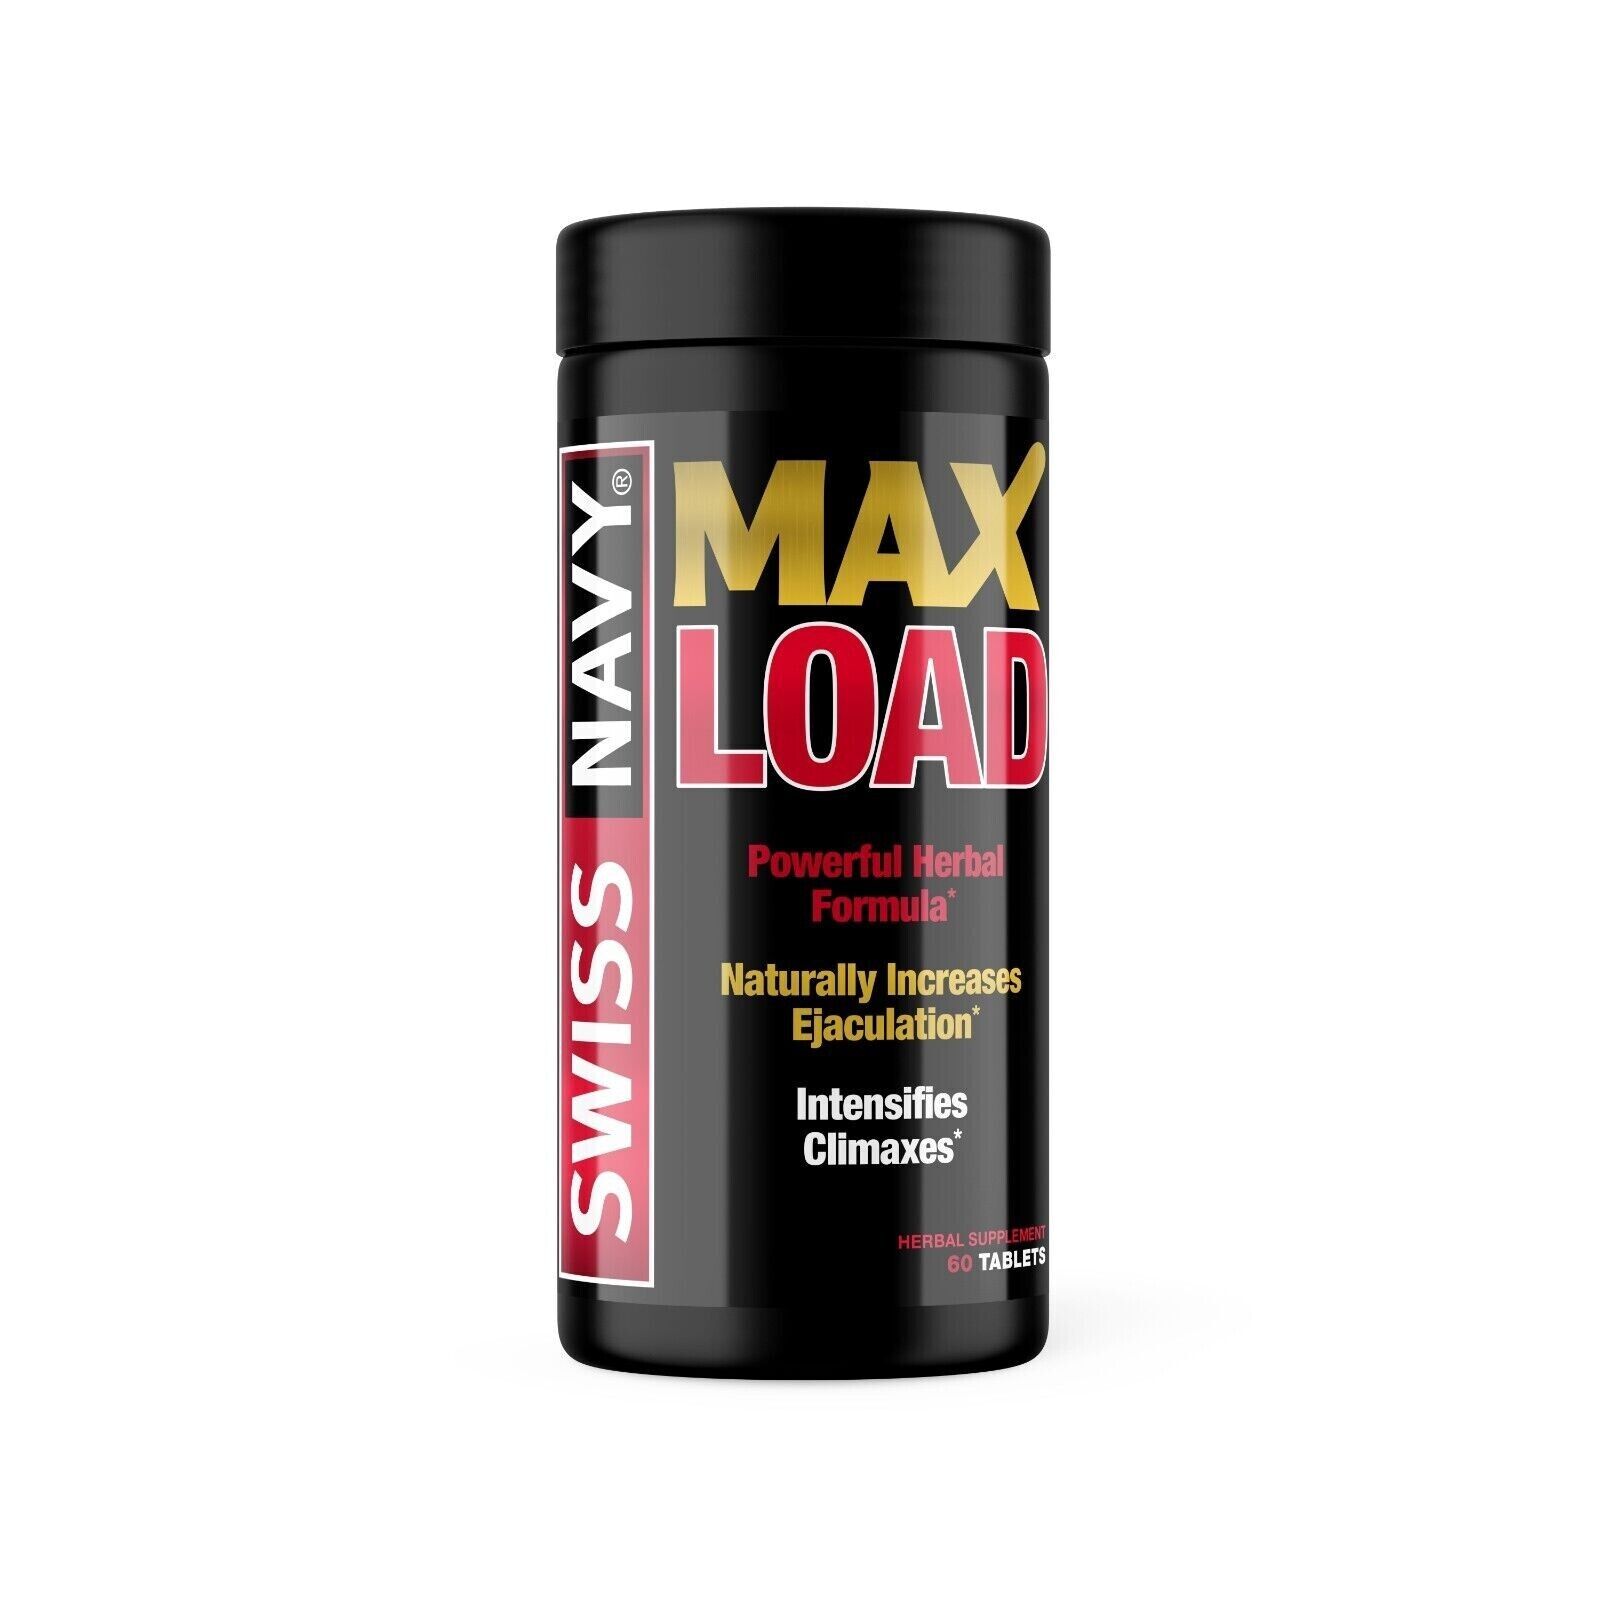 NEW Max Load Pills Bottle 60 count Increases Male Ejaculate Cum More